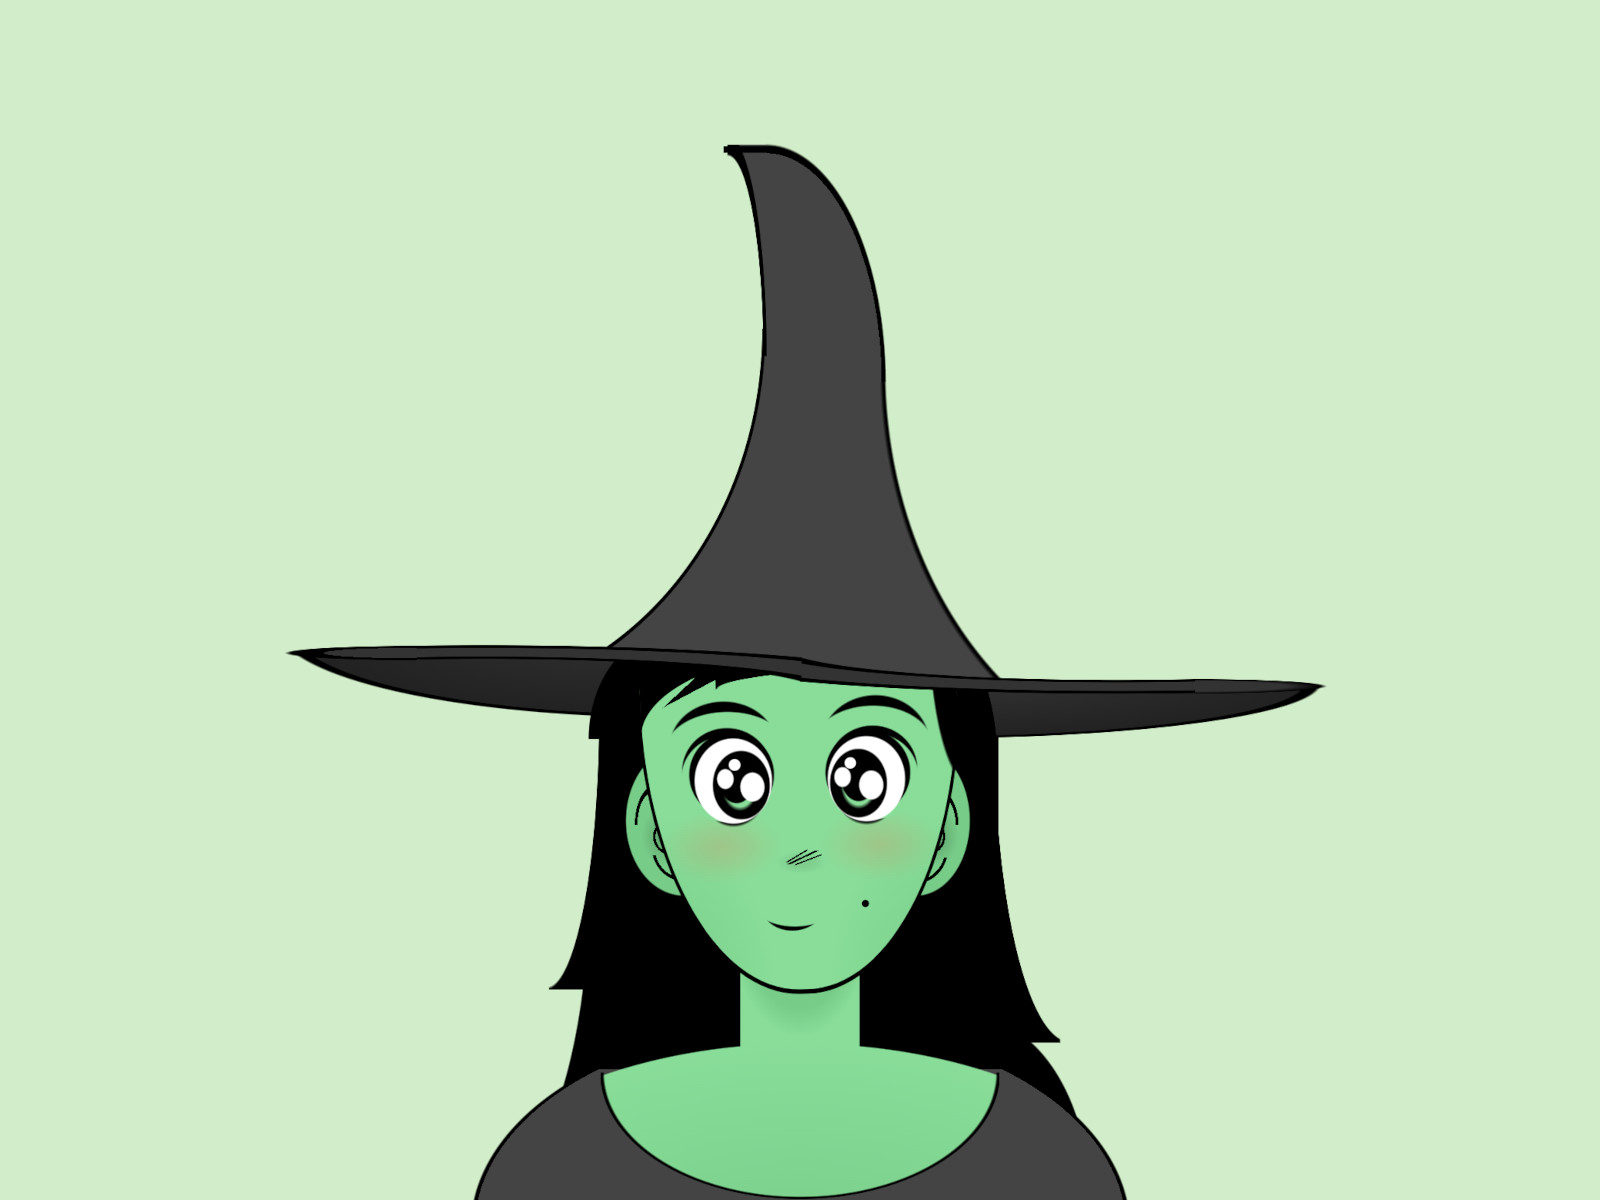 Cartoon of a witch